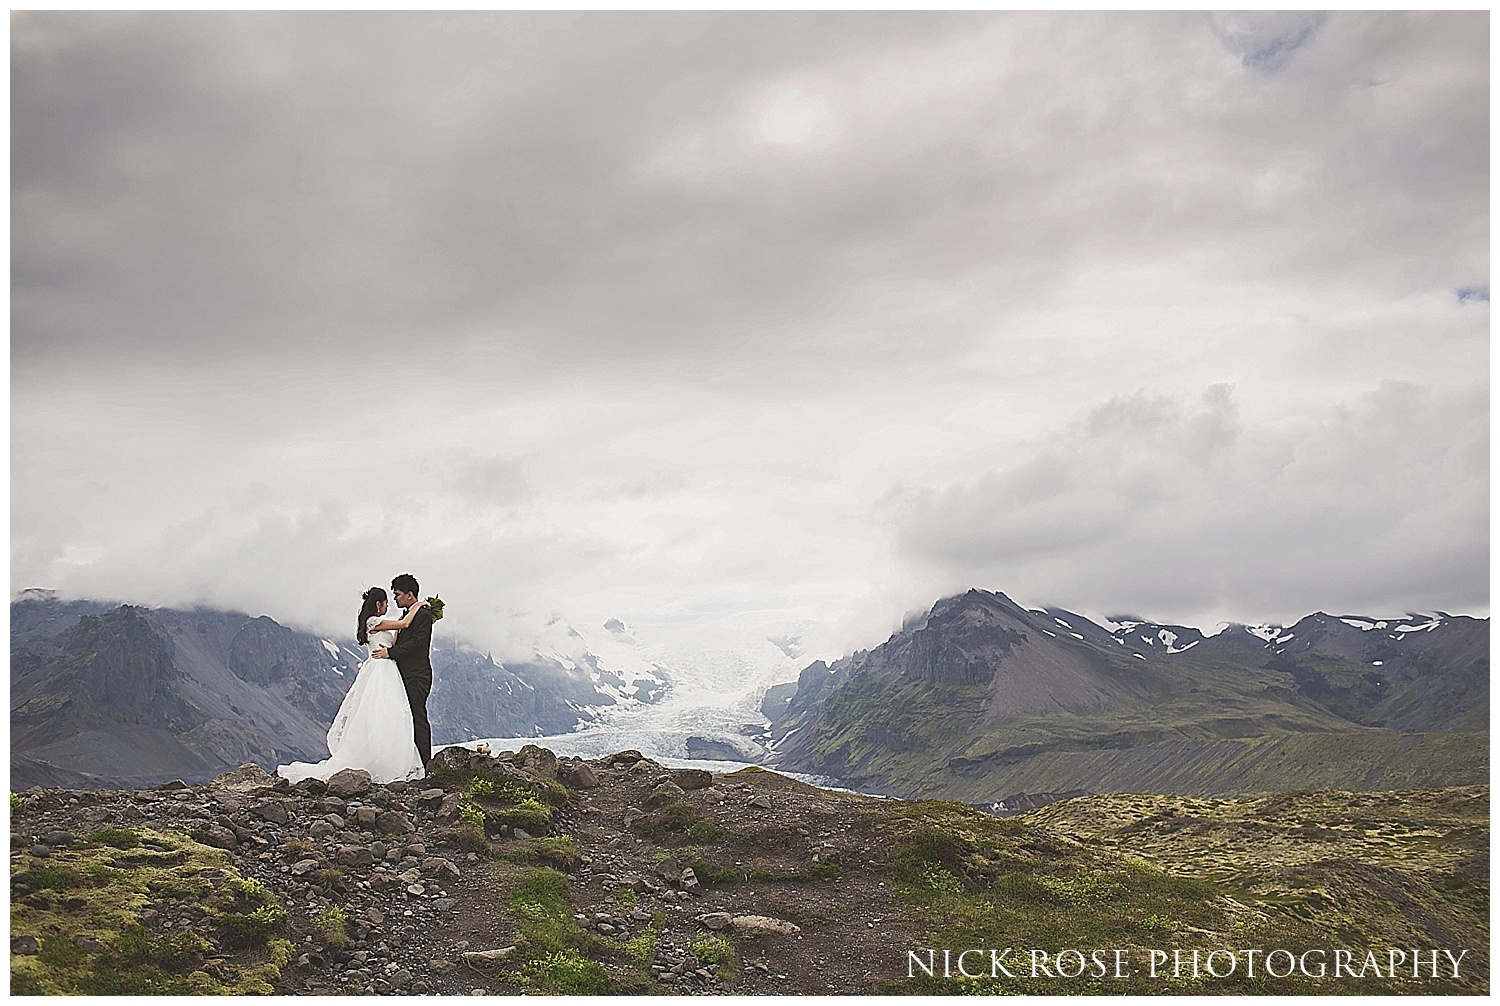 Asian pre wedding photography Iceland